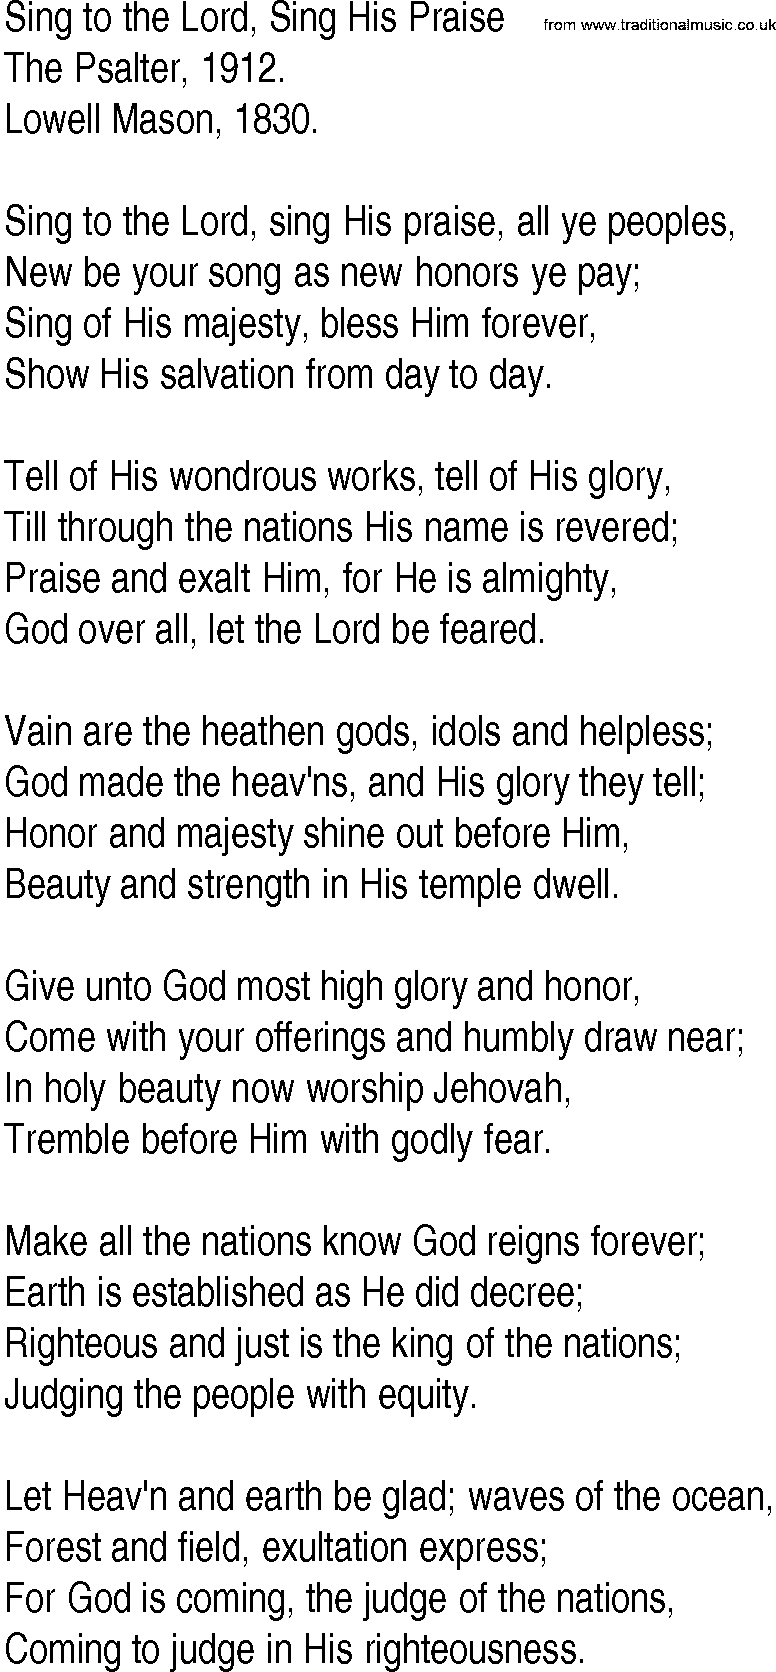 Hymn and Gospel Song: Sing to the Lord, Sing His Praise by The Psalter lyrics